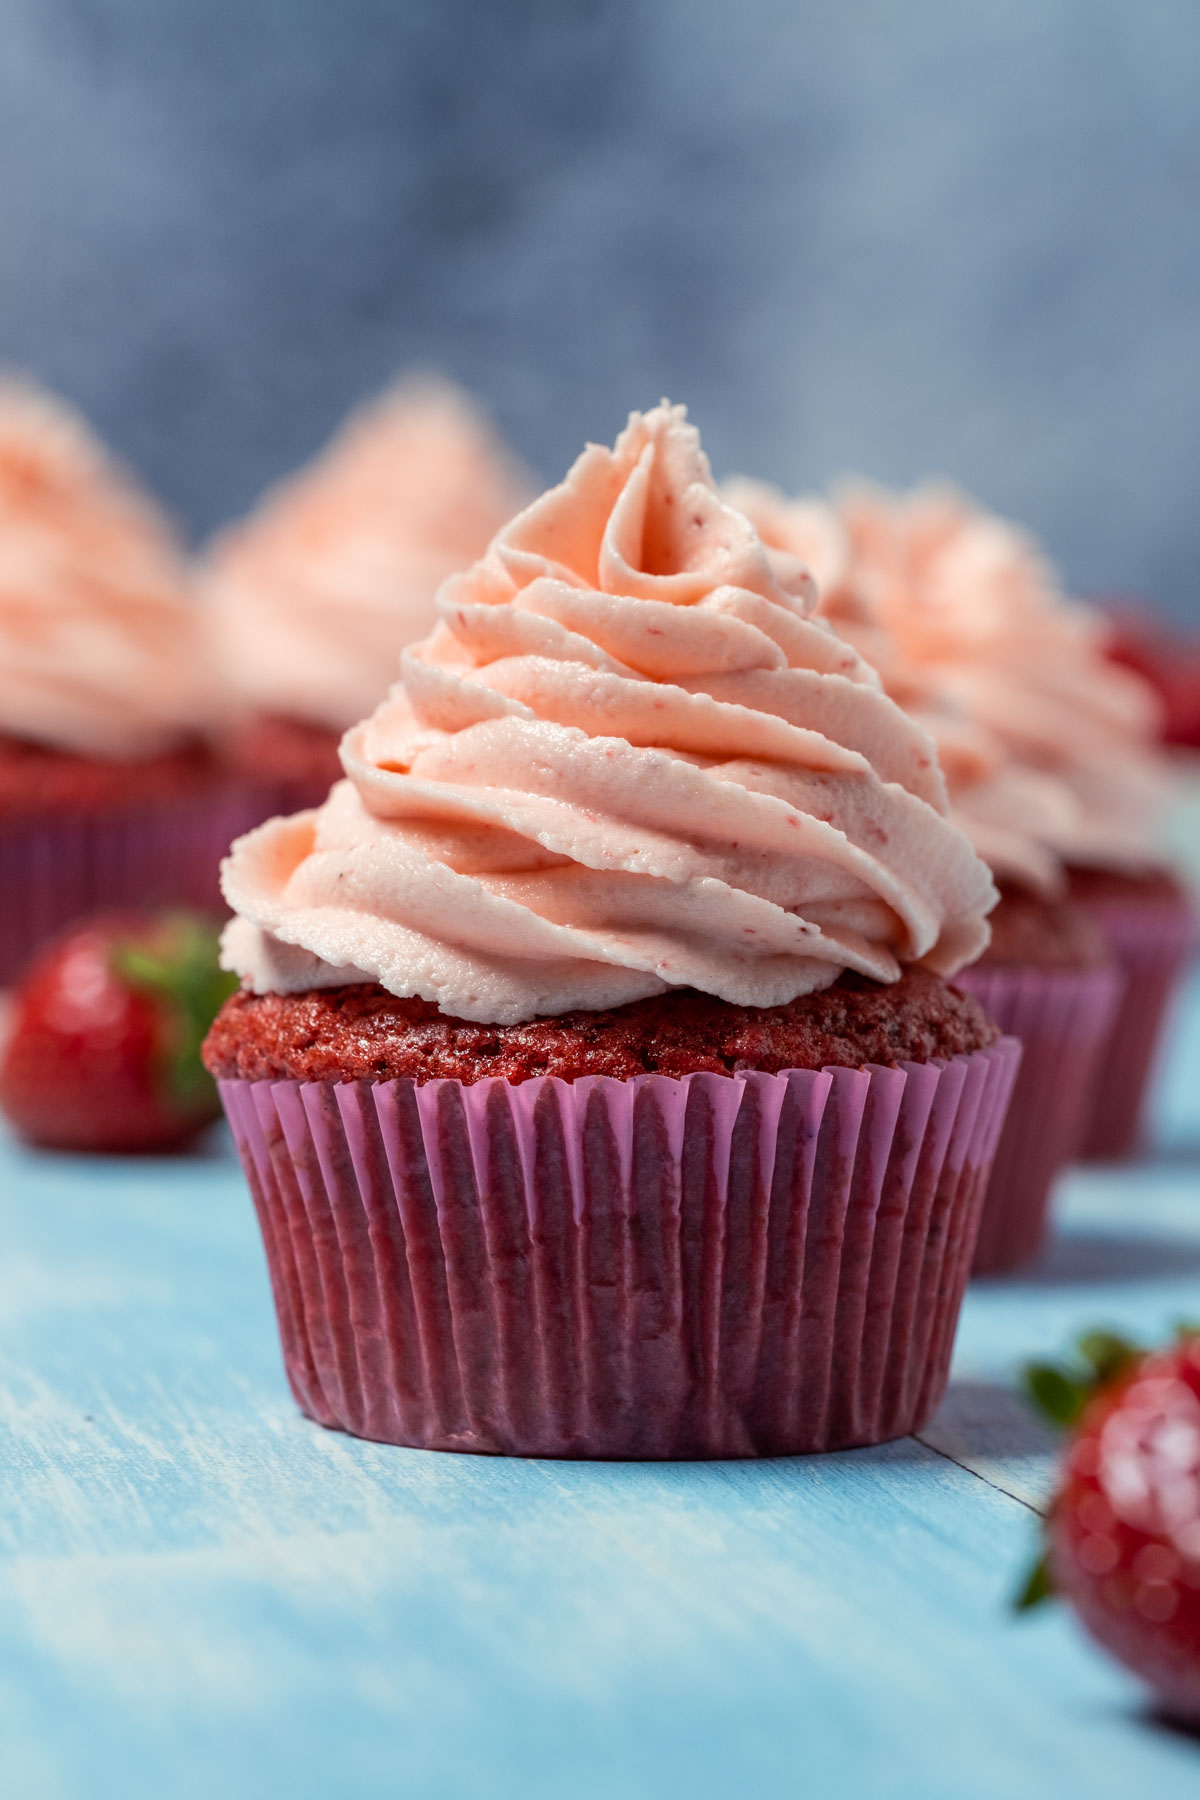 Vegan strawberry cupcake with frosting.